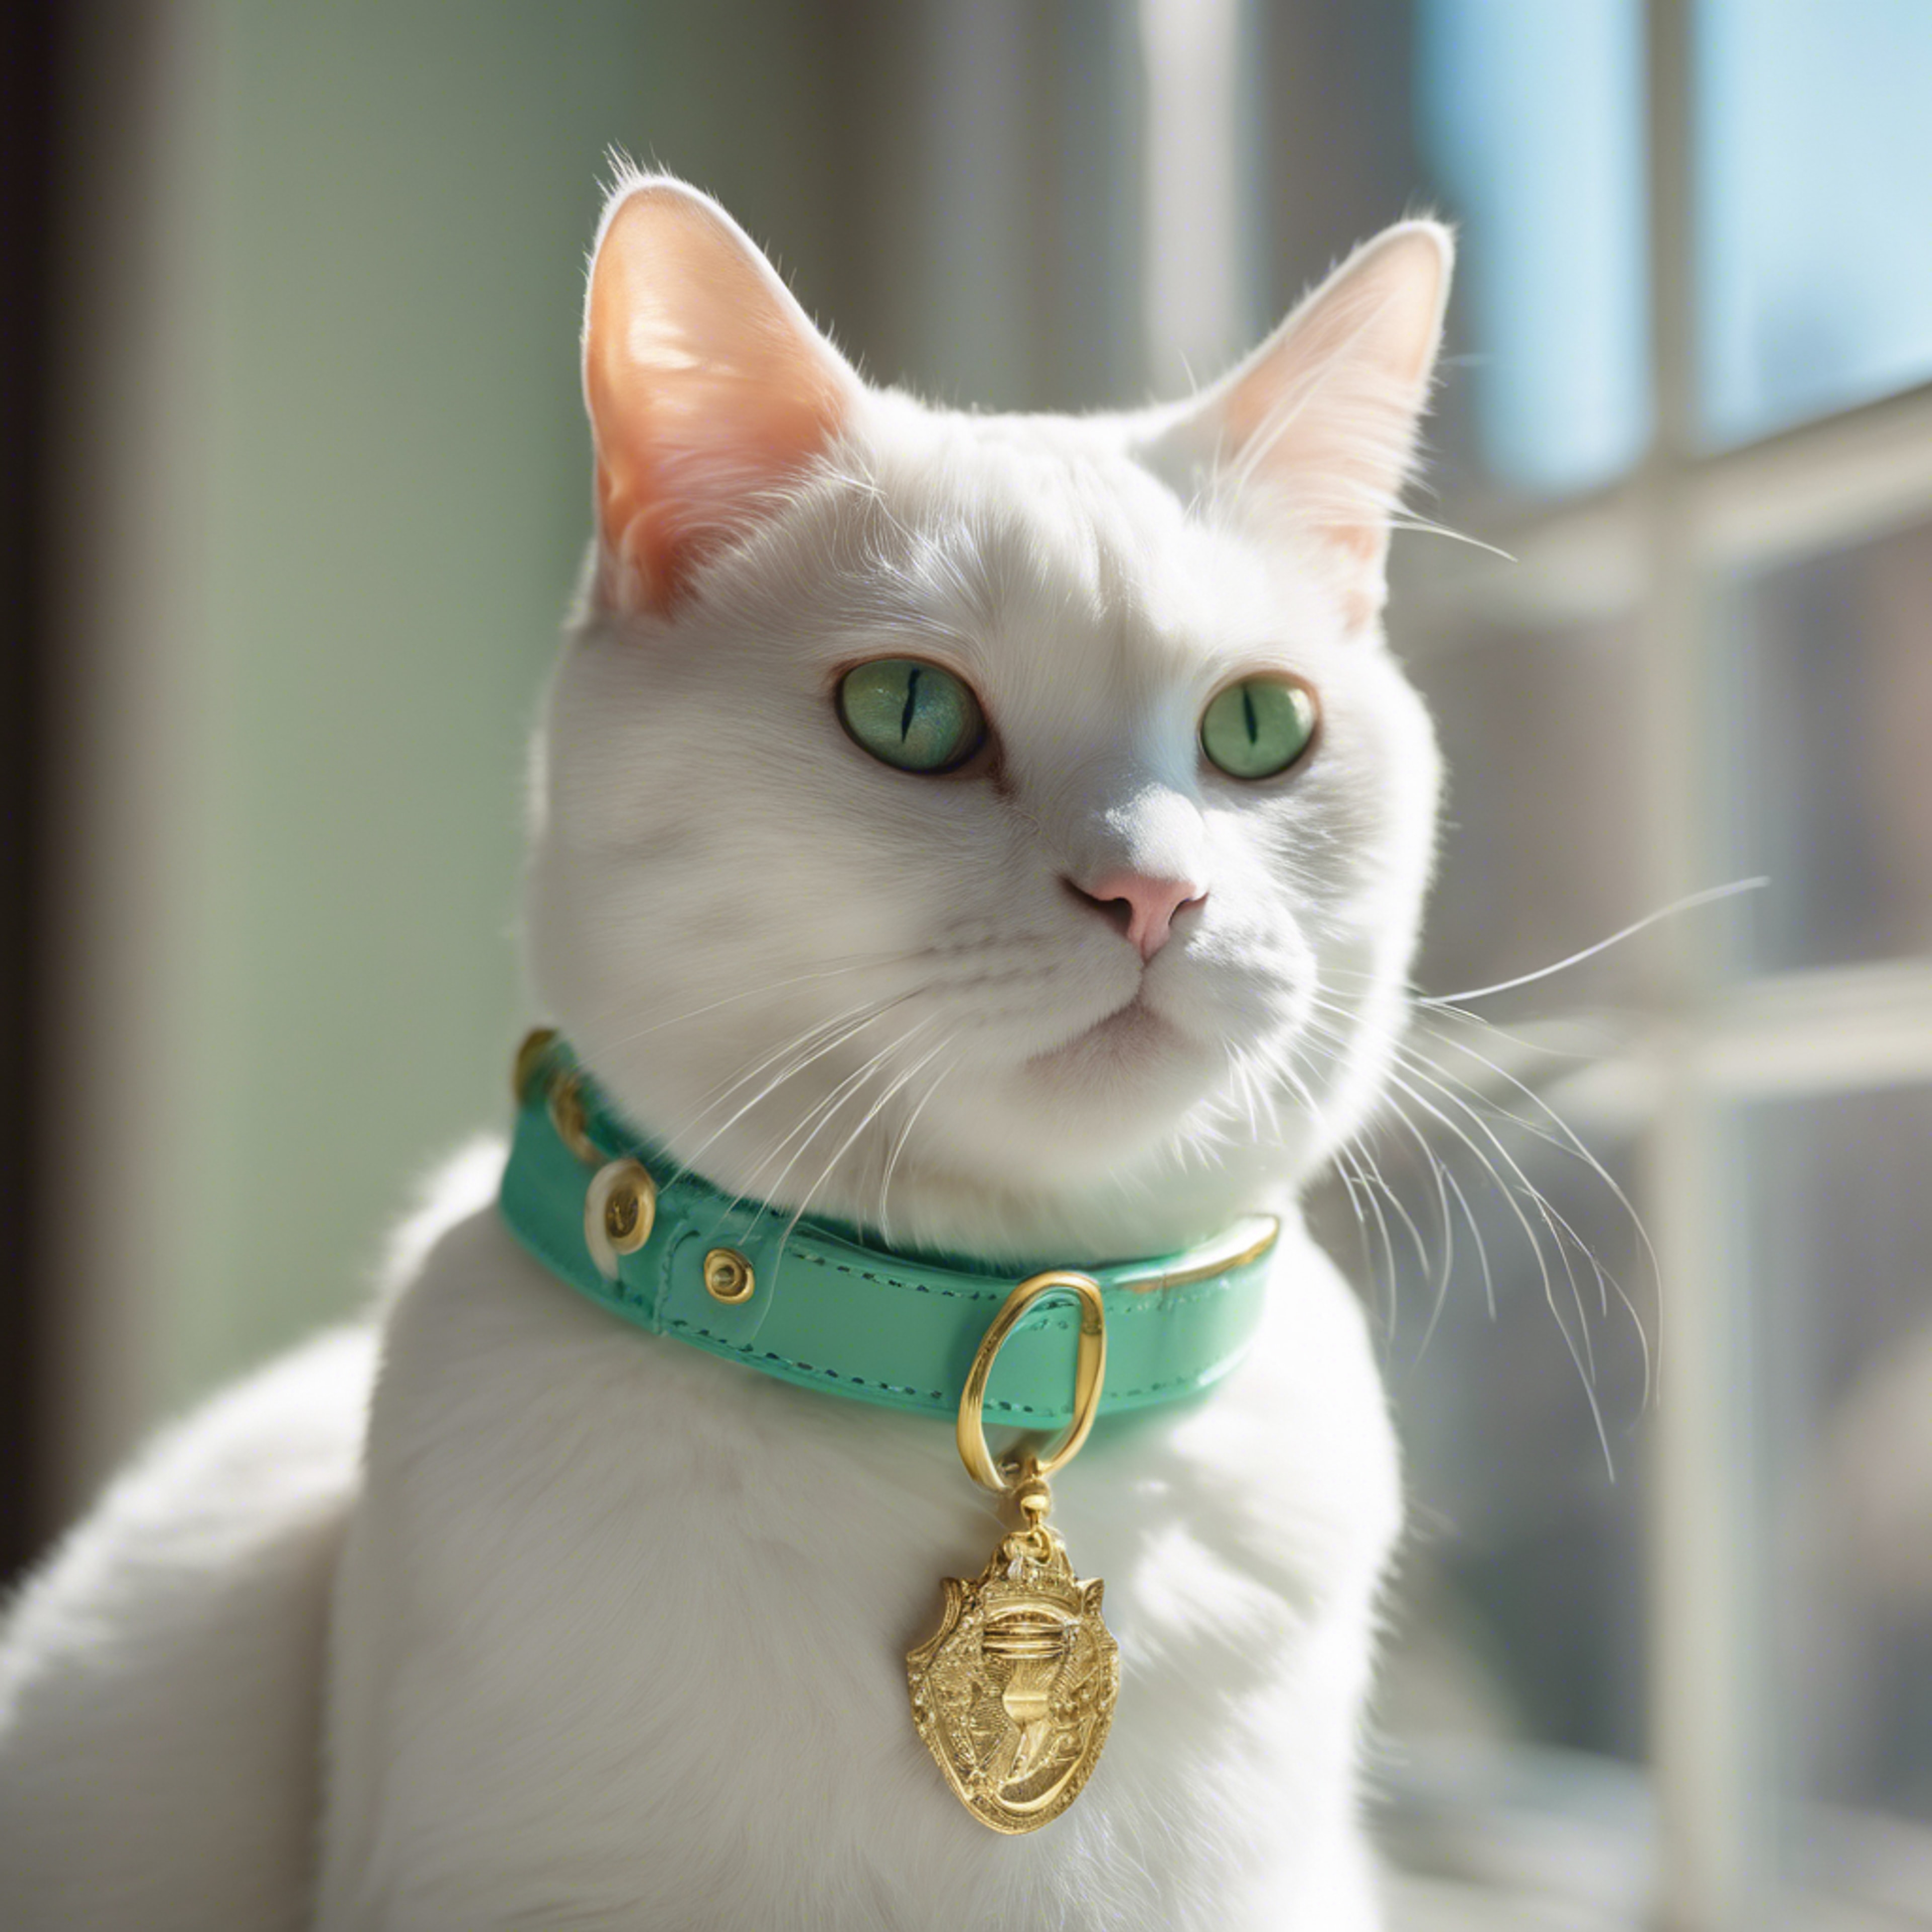 An adorable white cat wearing a preppy mint green collar with a gold buckle sitting in a sunny window. Fond d'écran[8de0351476e04873aa5e]